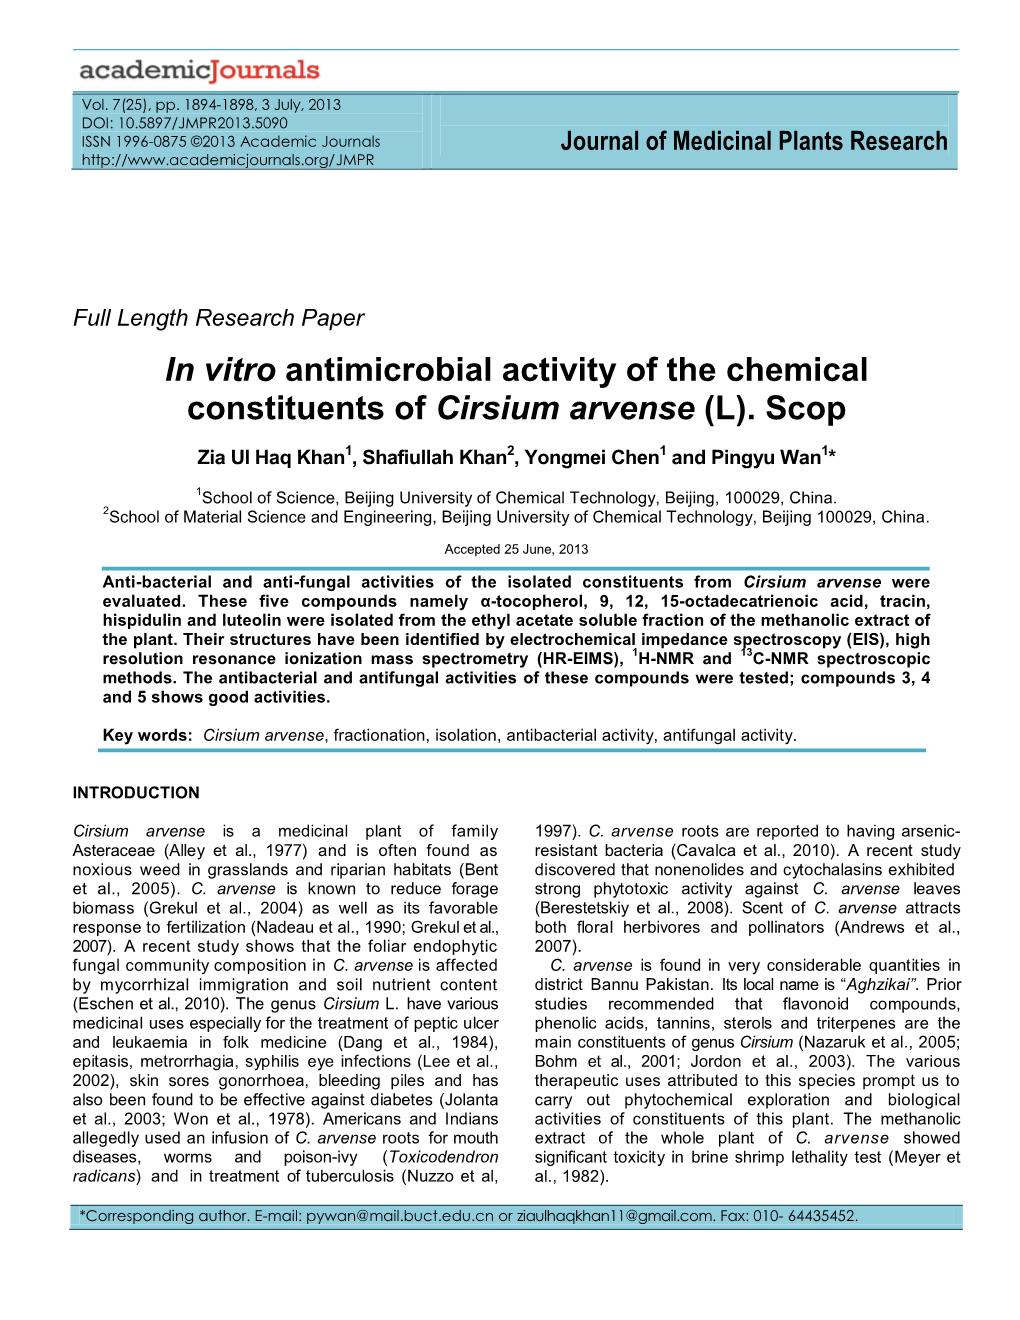 In Vitro Antimicrobial Activity of the Chemical Constituents of Cirsium Arvense (L)